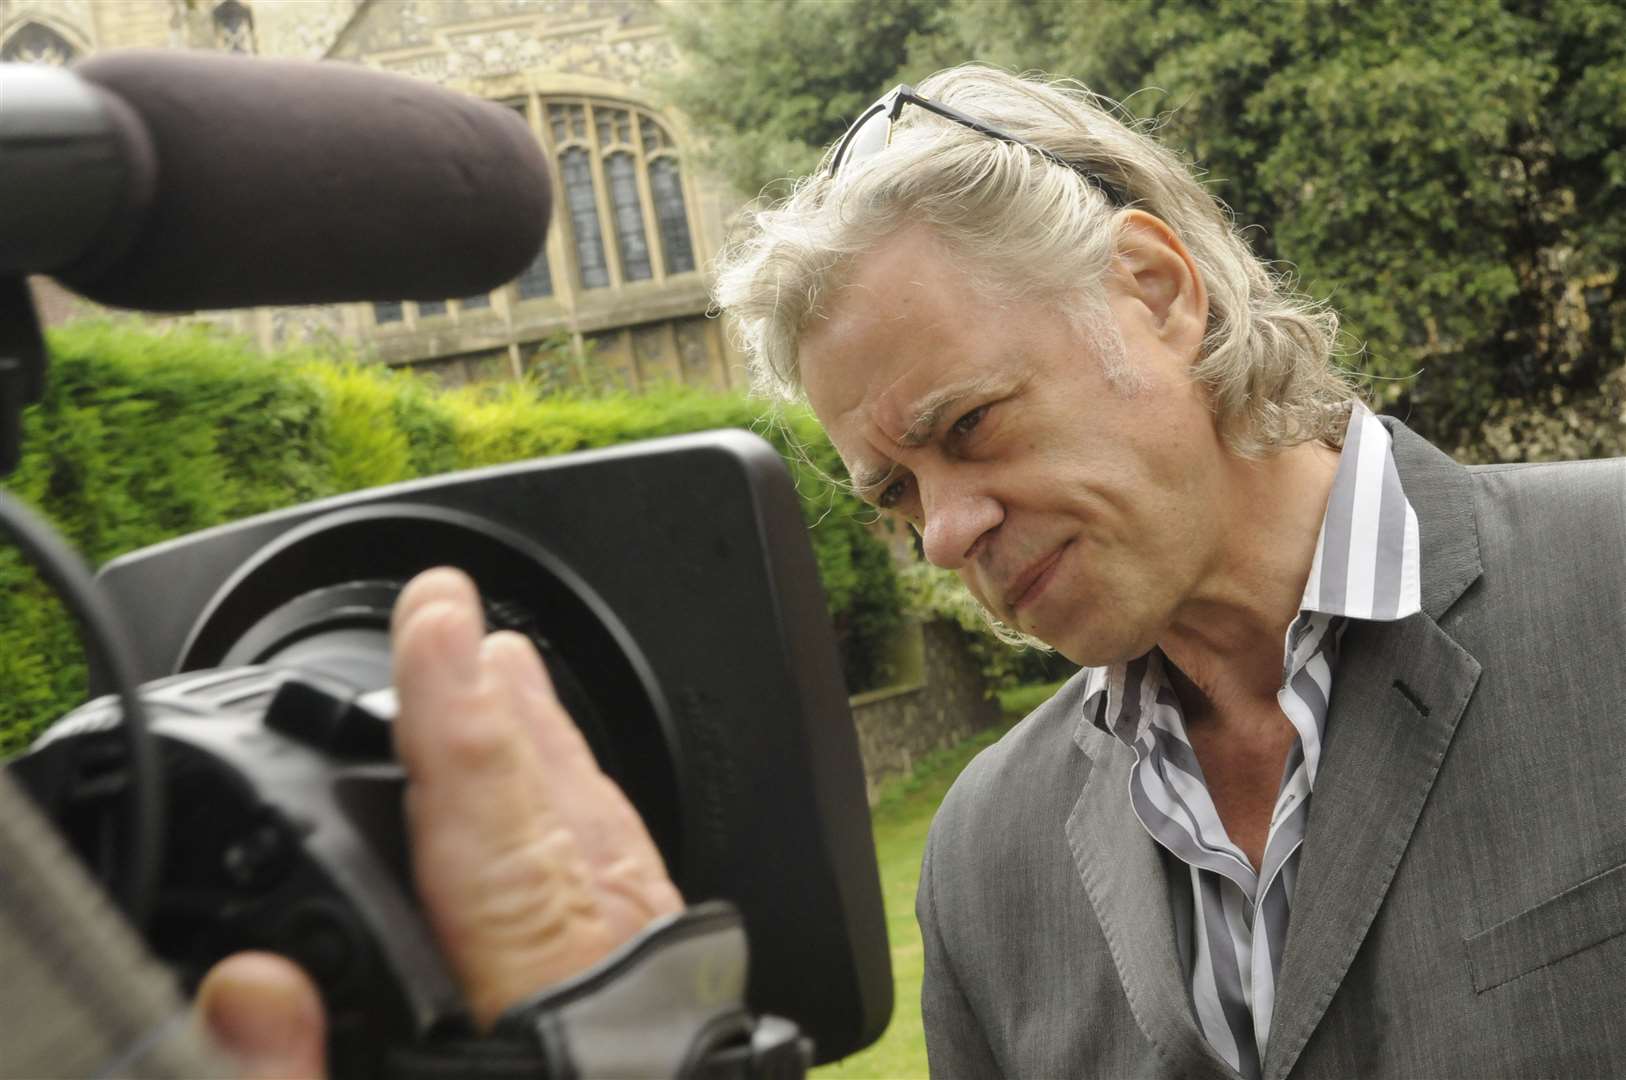 Bob Geldof had his wedding blessed at a church neighbouring his home in Faversham